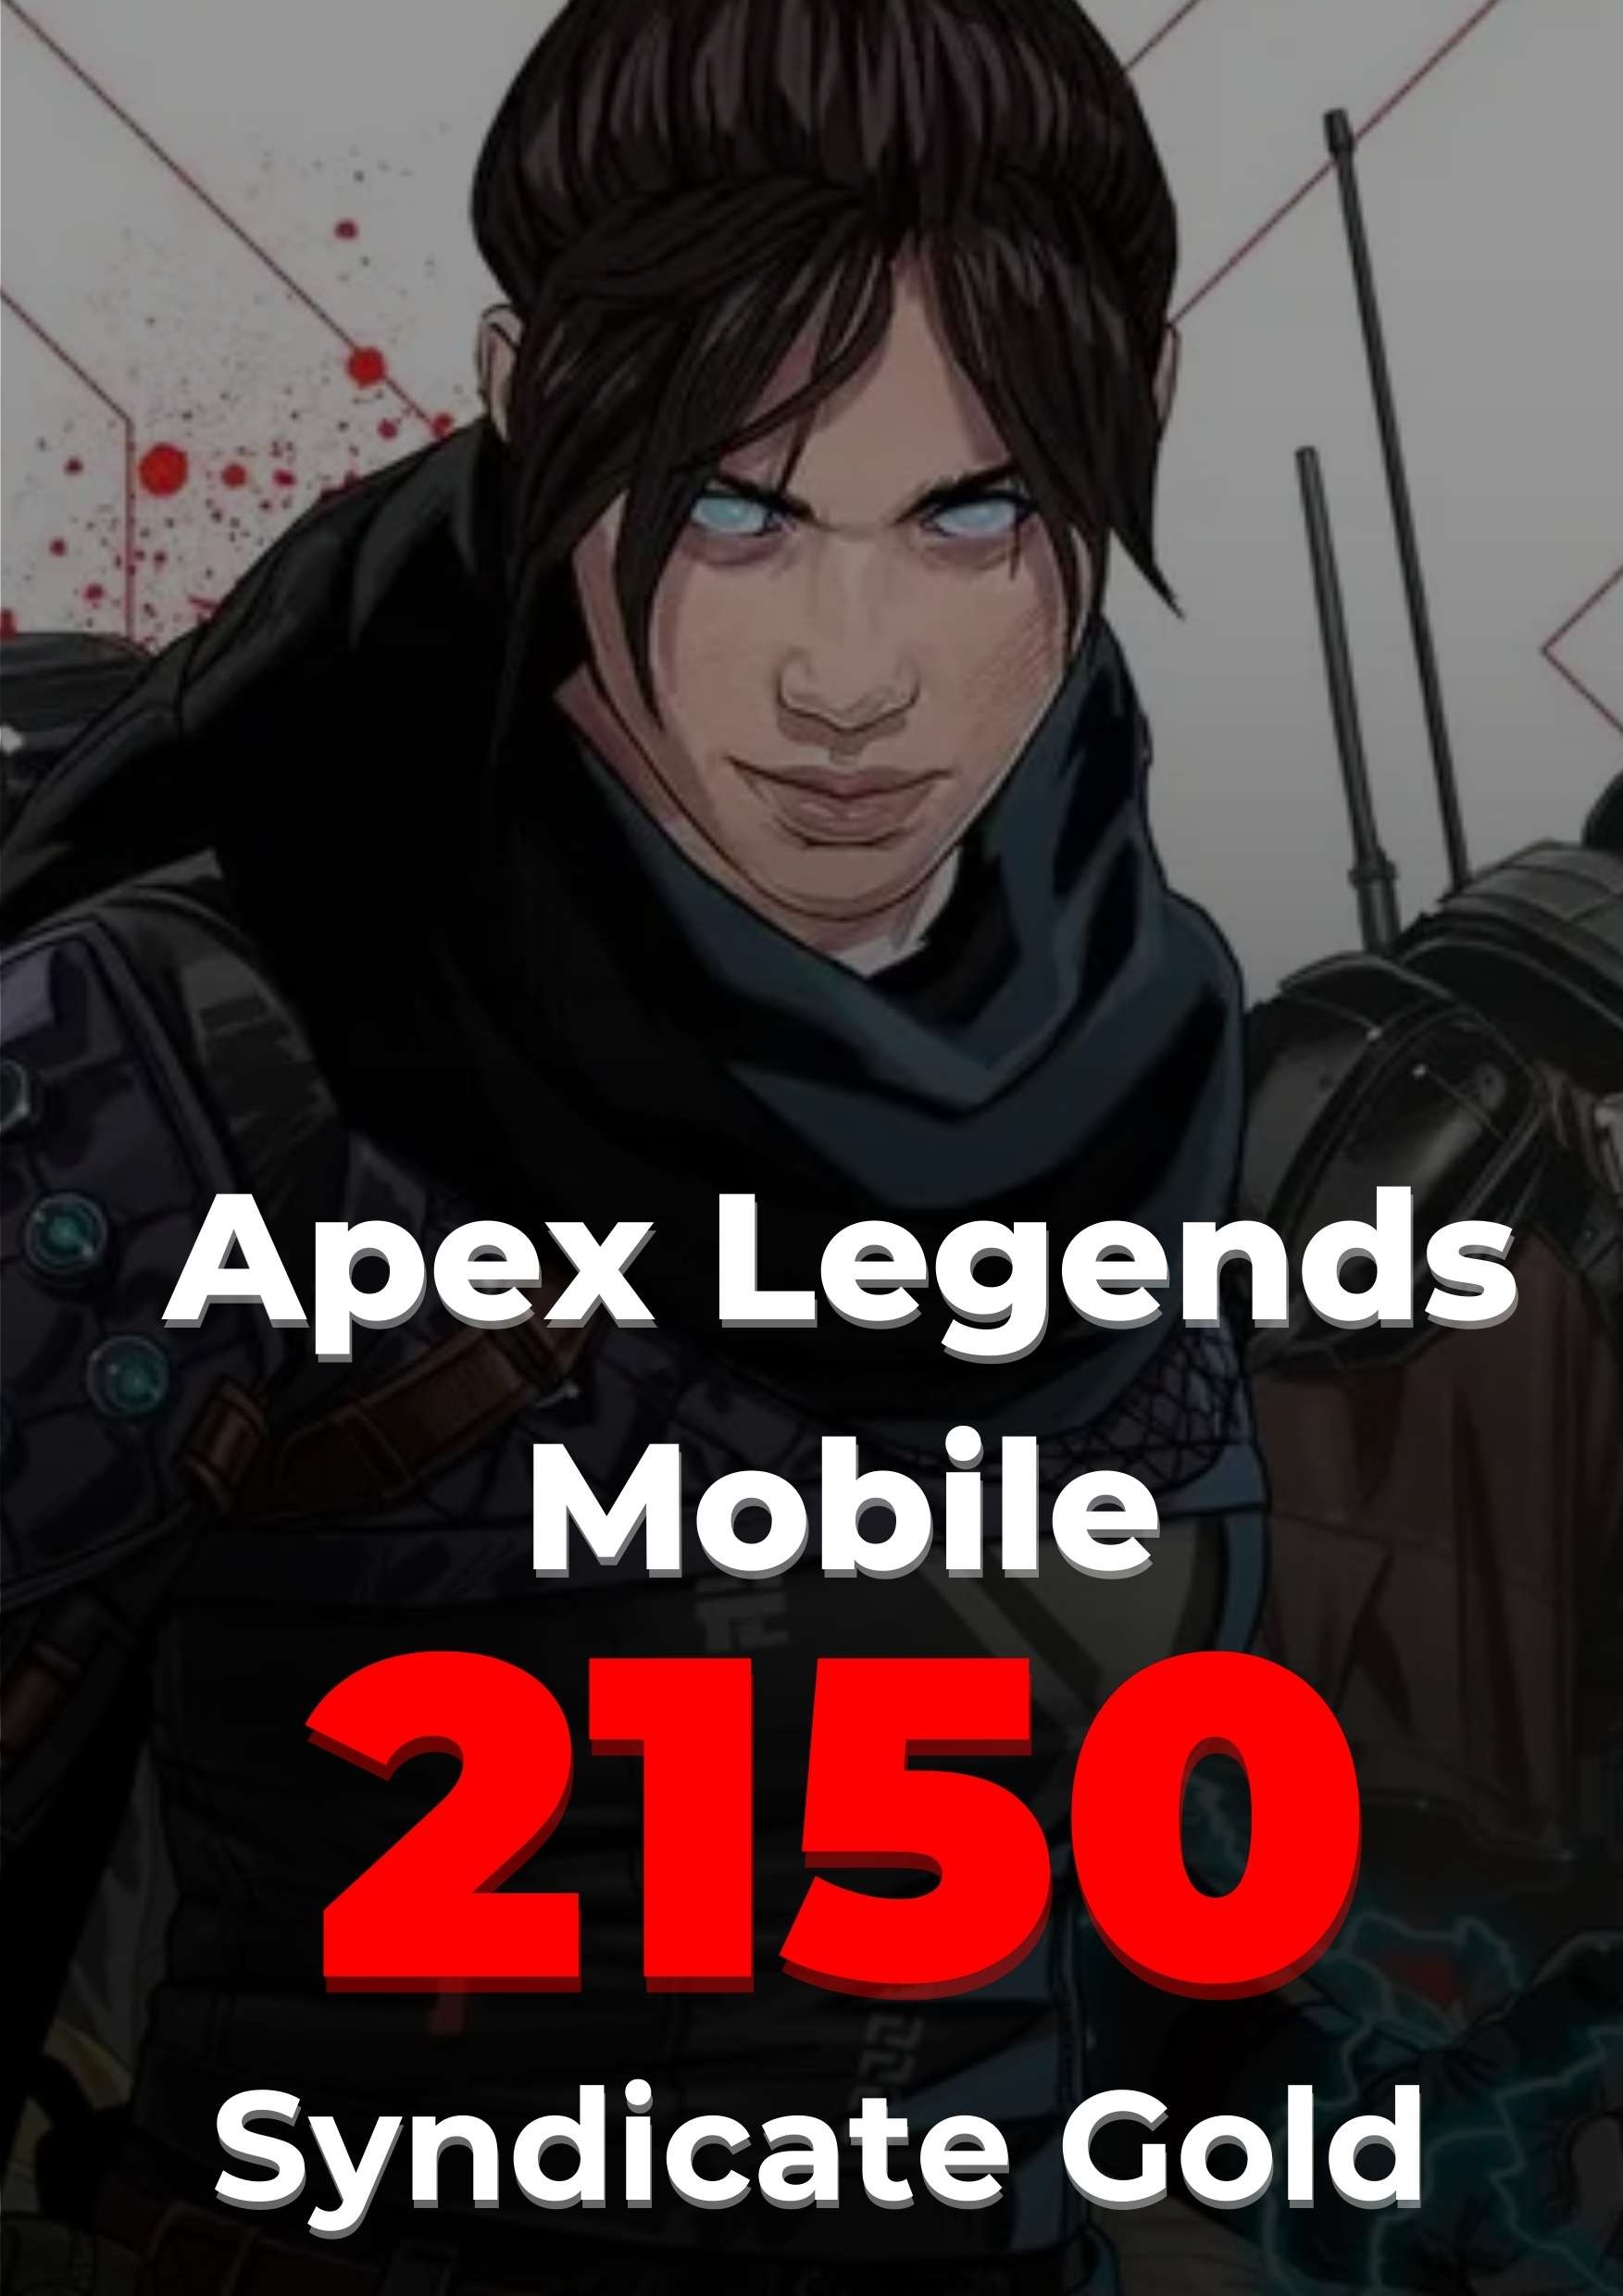 Apex Legends Mobile 2150 Syndicate Gold